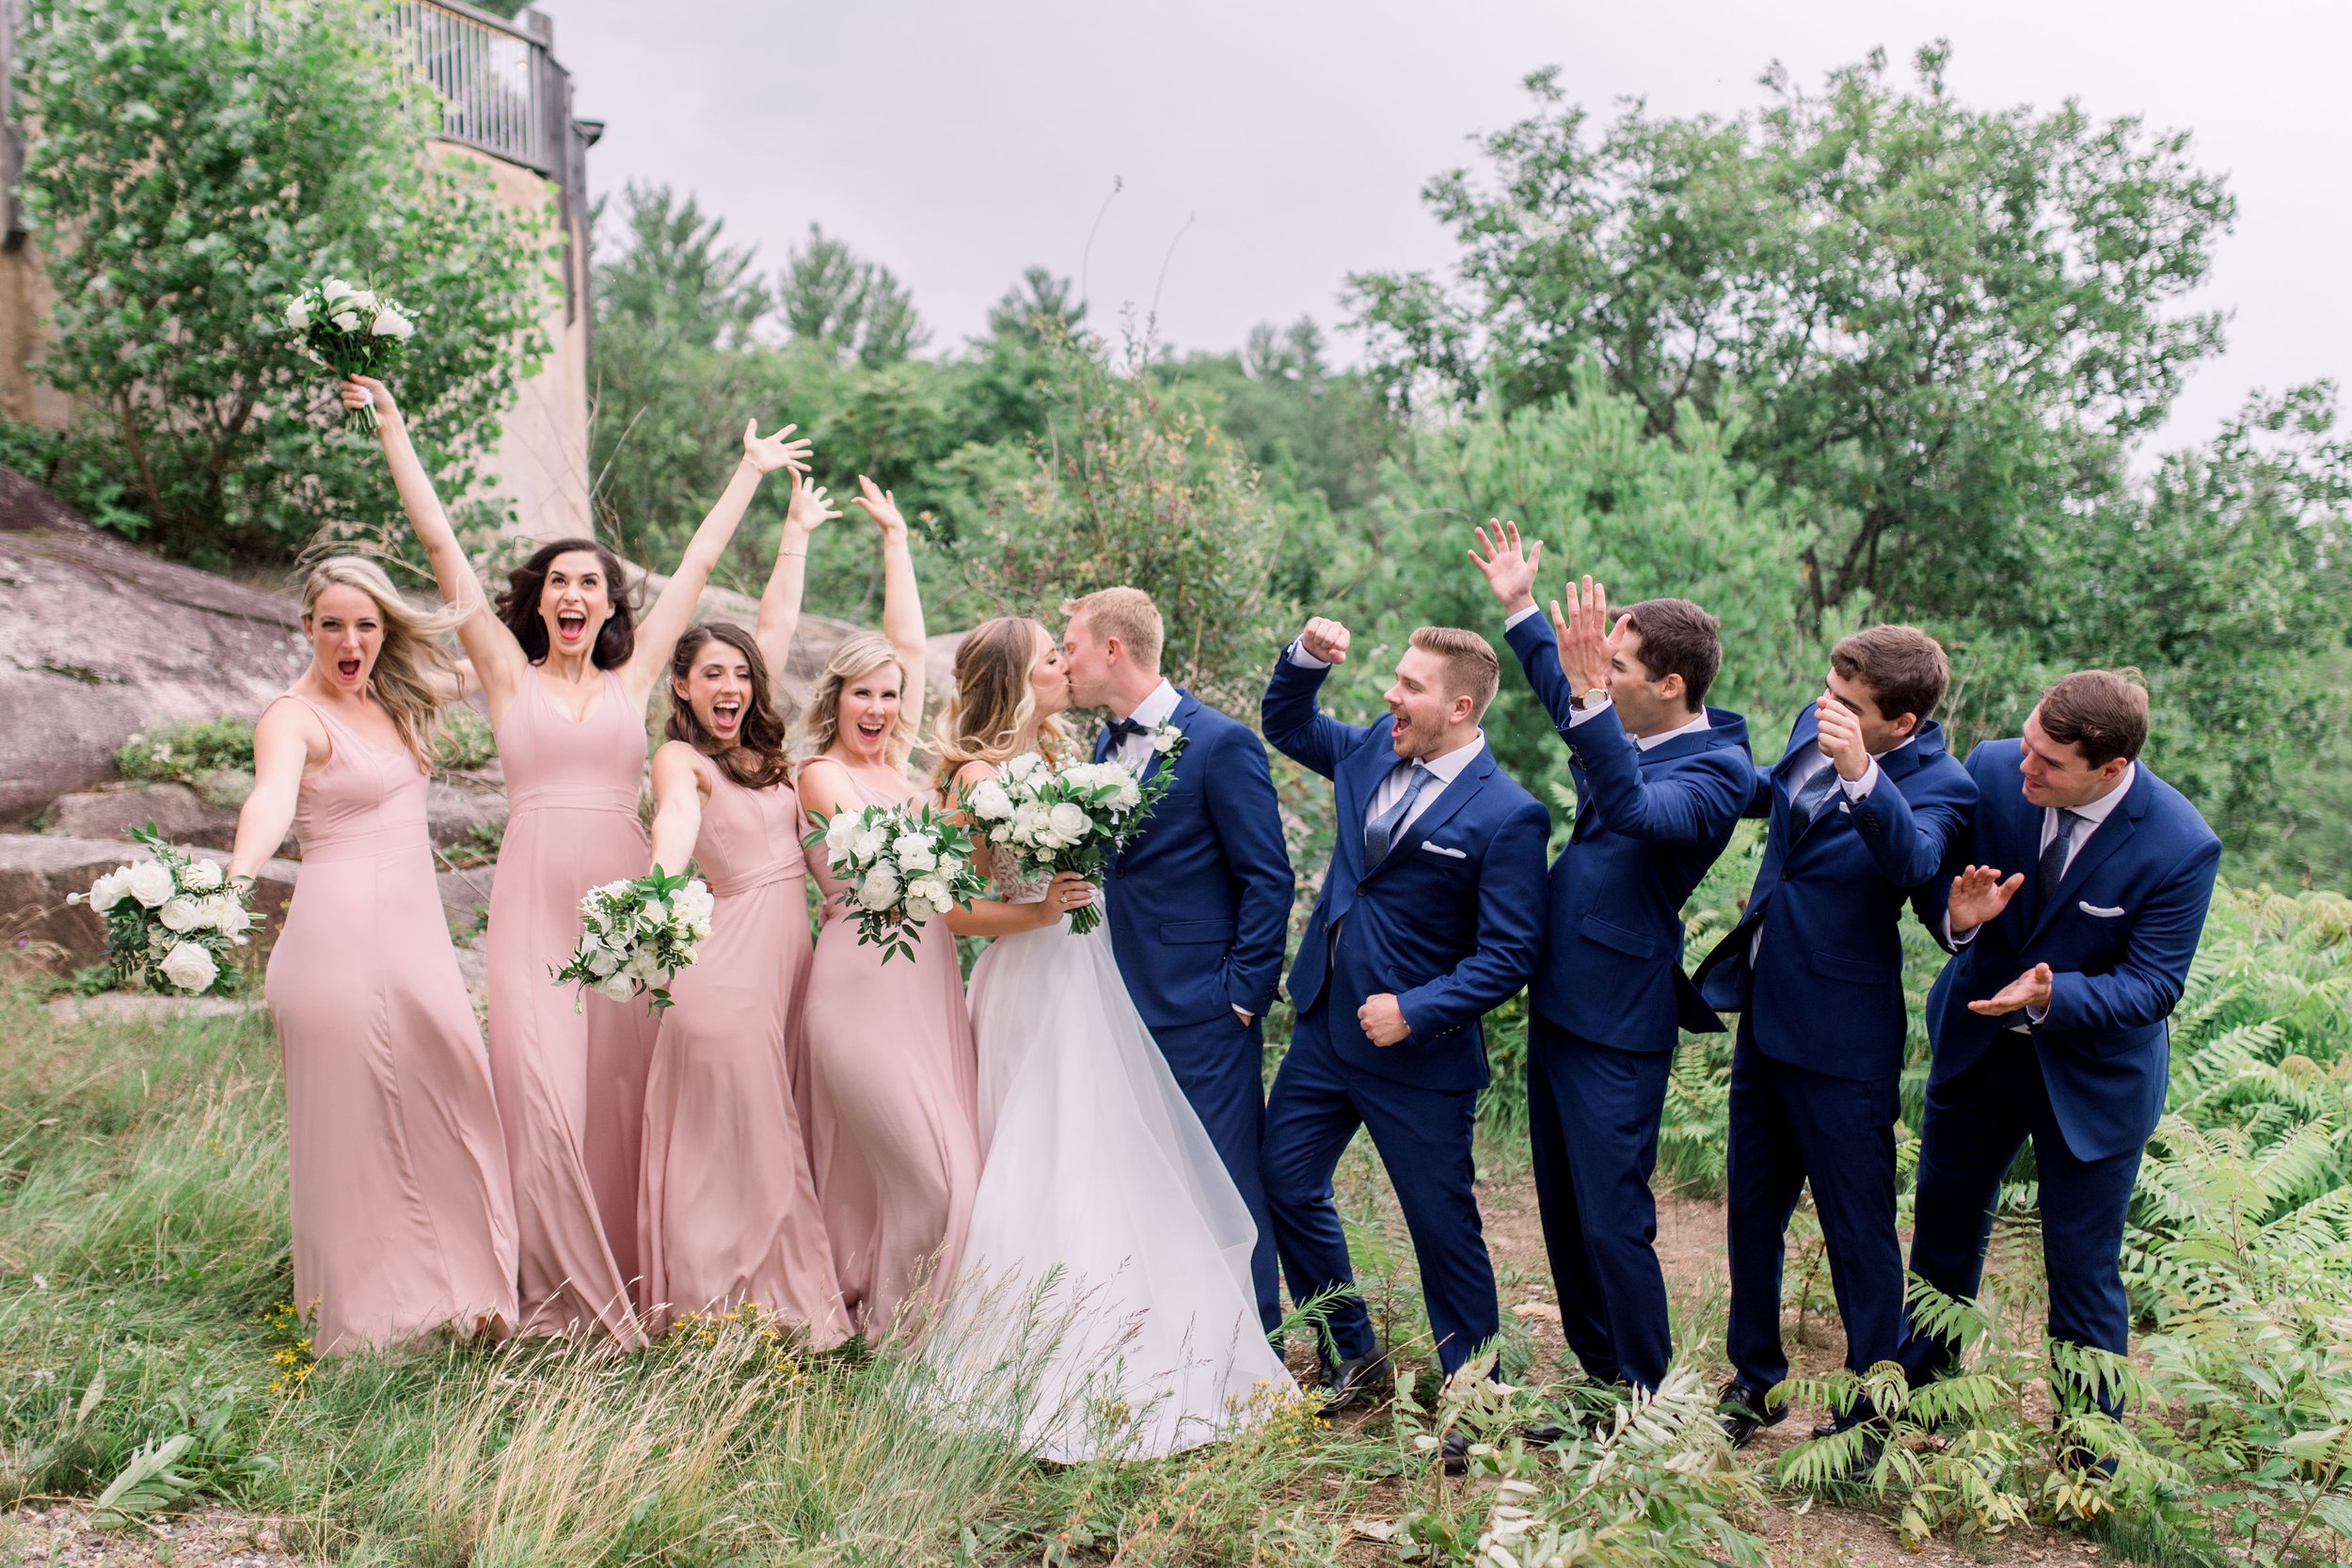  Bridesmaids and groomsmen in Wakefield cheer as the bride and groom kiss by Chelsea Mason Photography. Le Belevedere weddings #Quebecweddings #elegantoutdoorwedding #Quebecweddingphotographers #Chelseamasonphotography #Chelseamasonweddings 